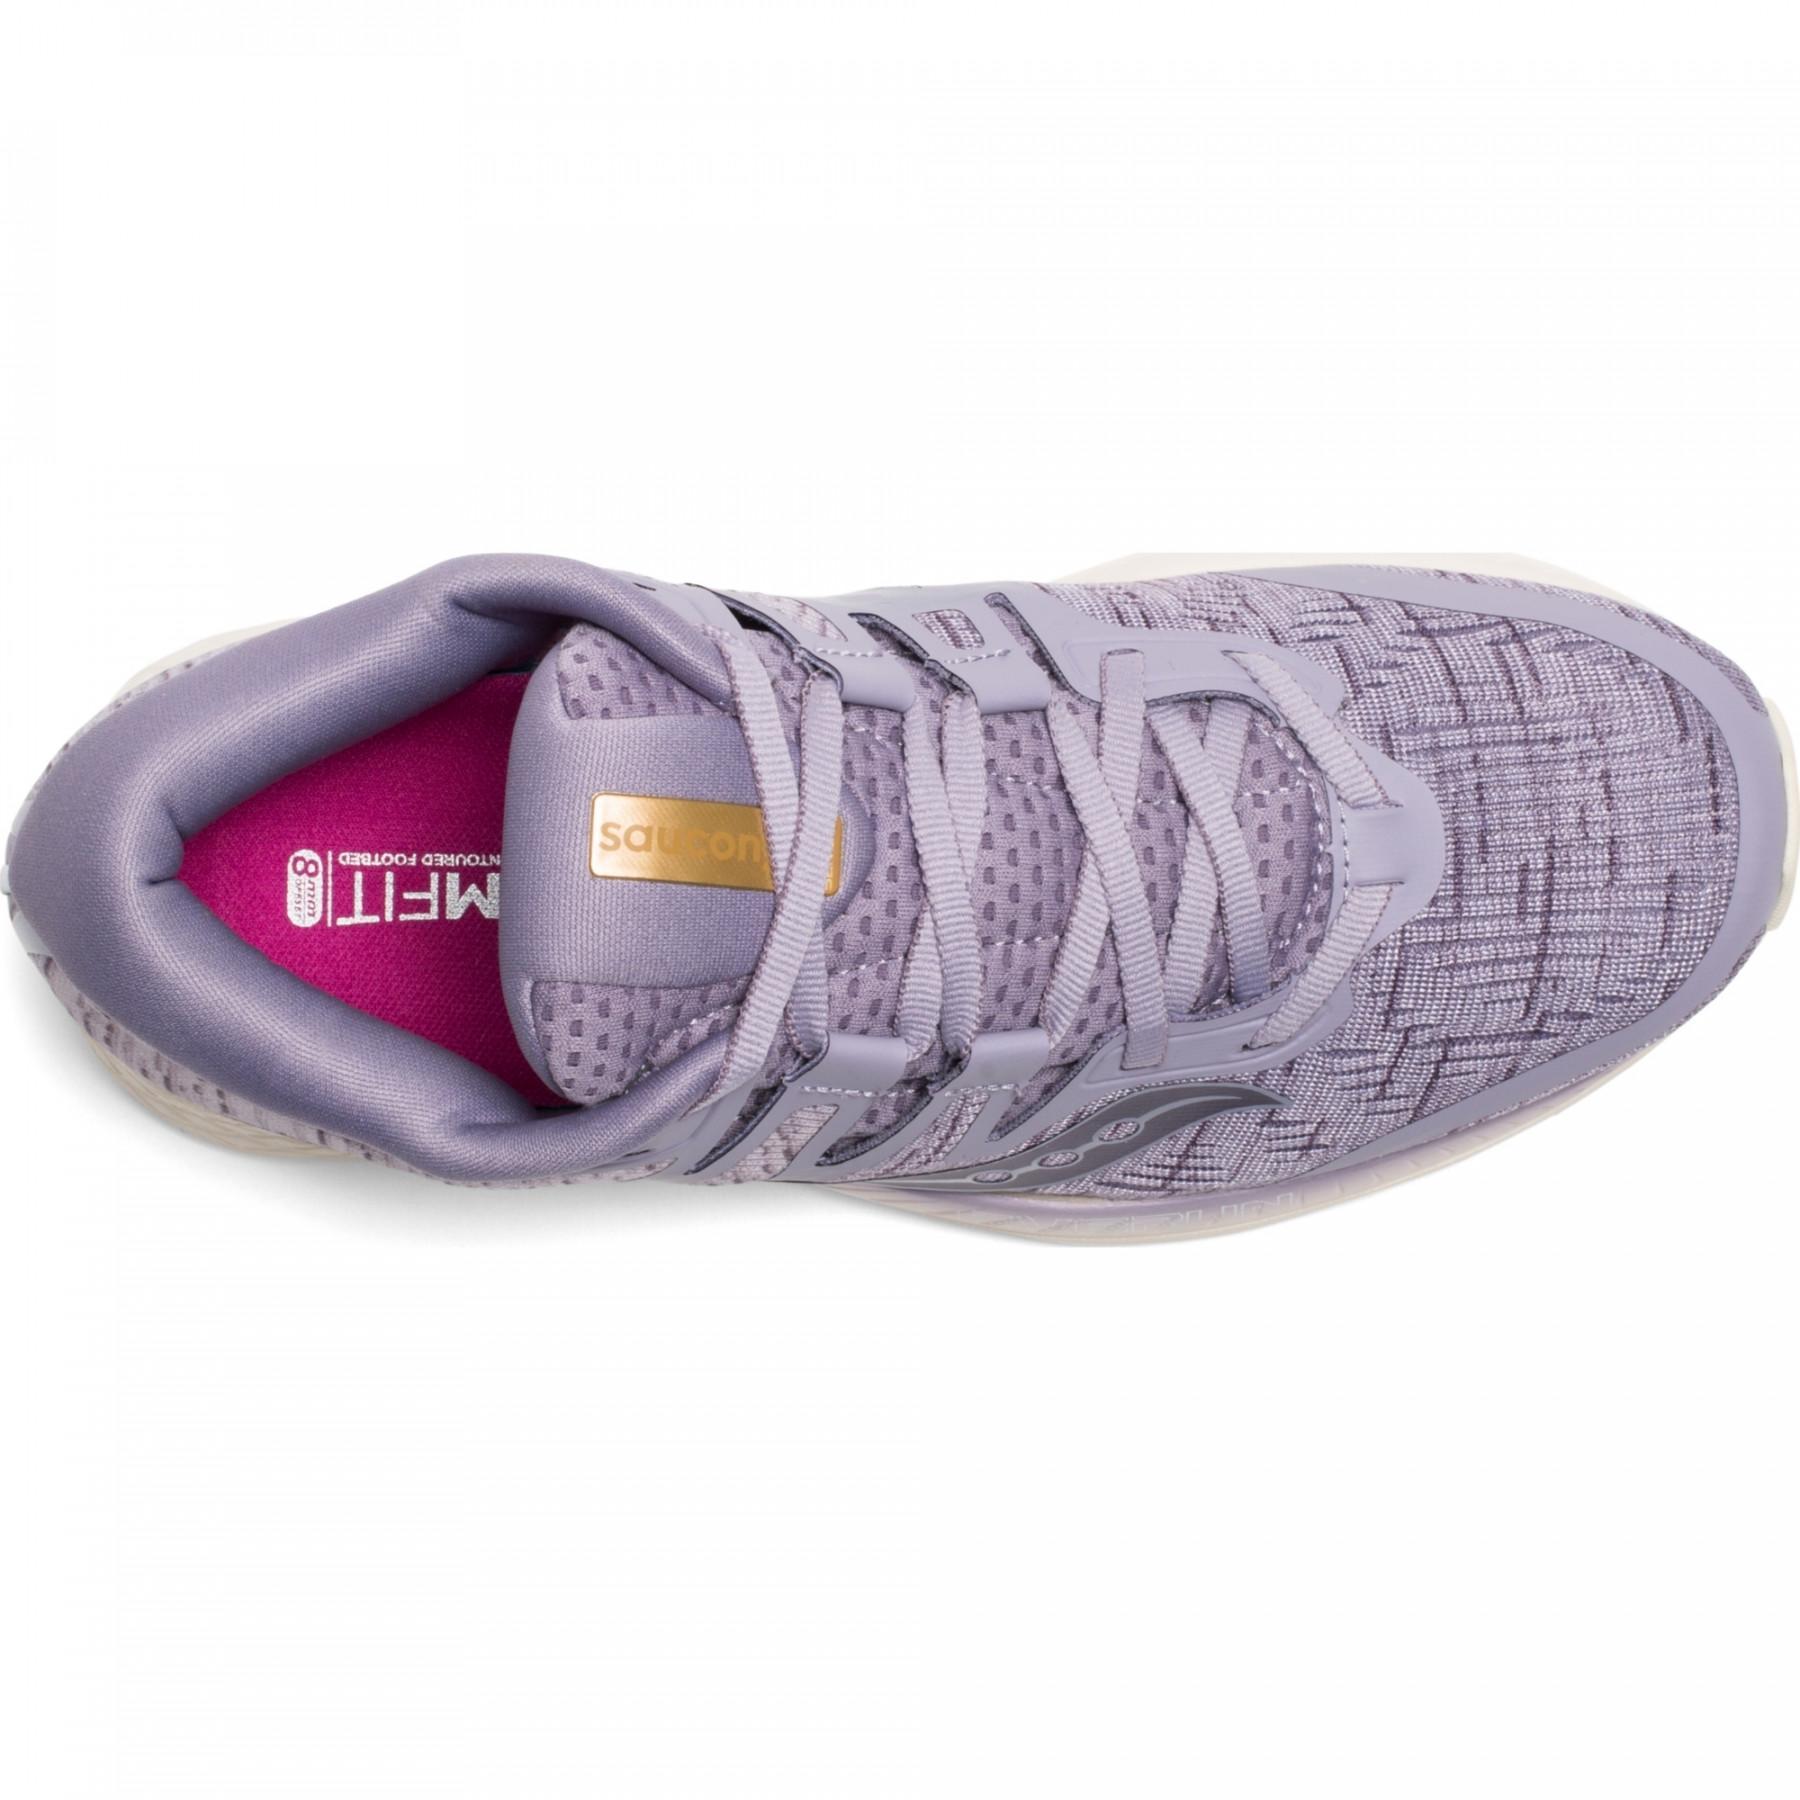 Women's shoes Saucony ride ISO